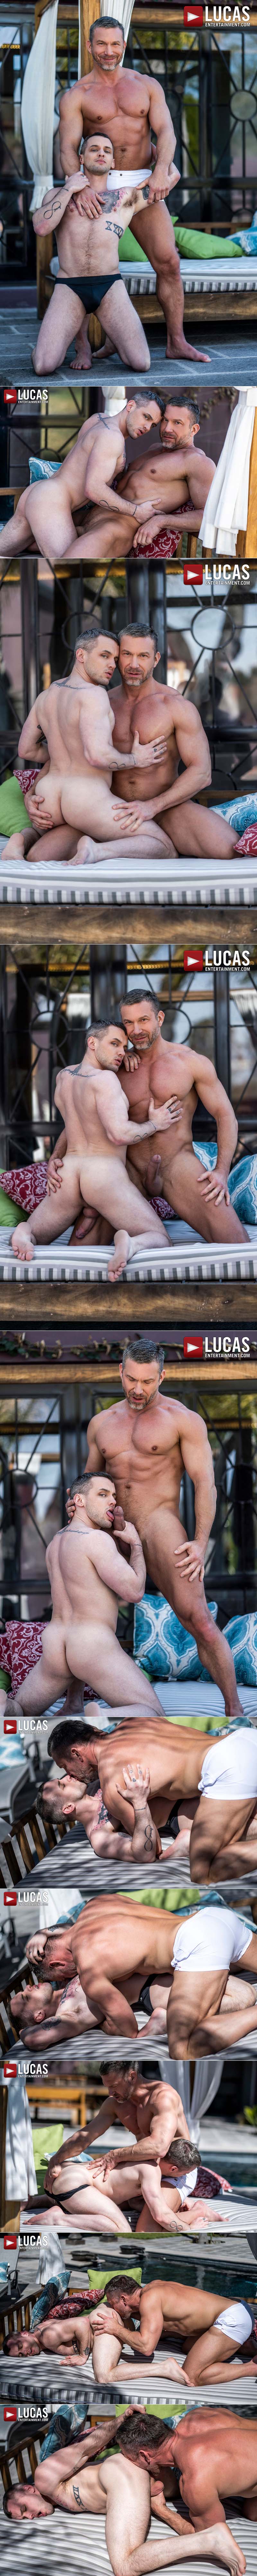 Daddy's Forbidden Lust, Scene Three (Tomas Brands Breeds Colton Grey) at Lucas Entertainment